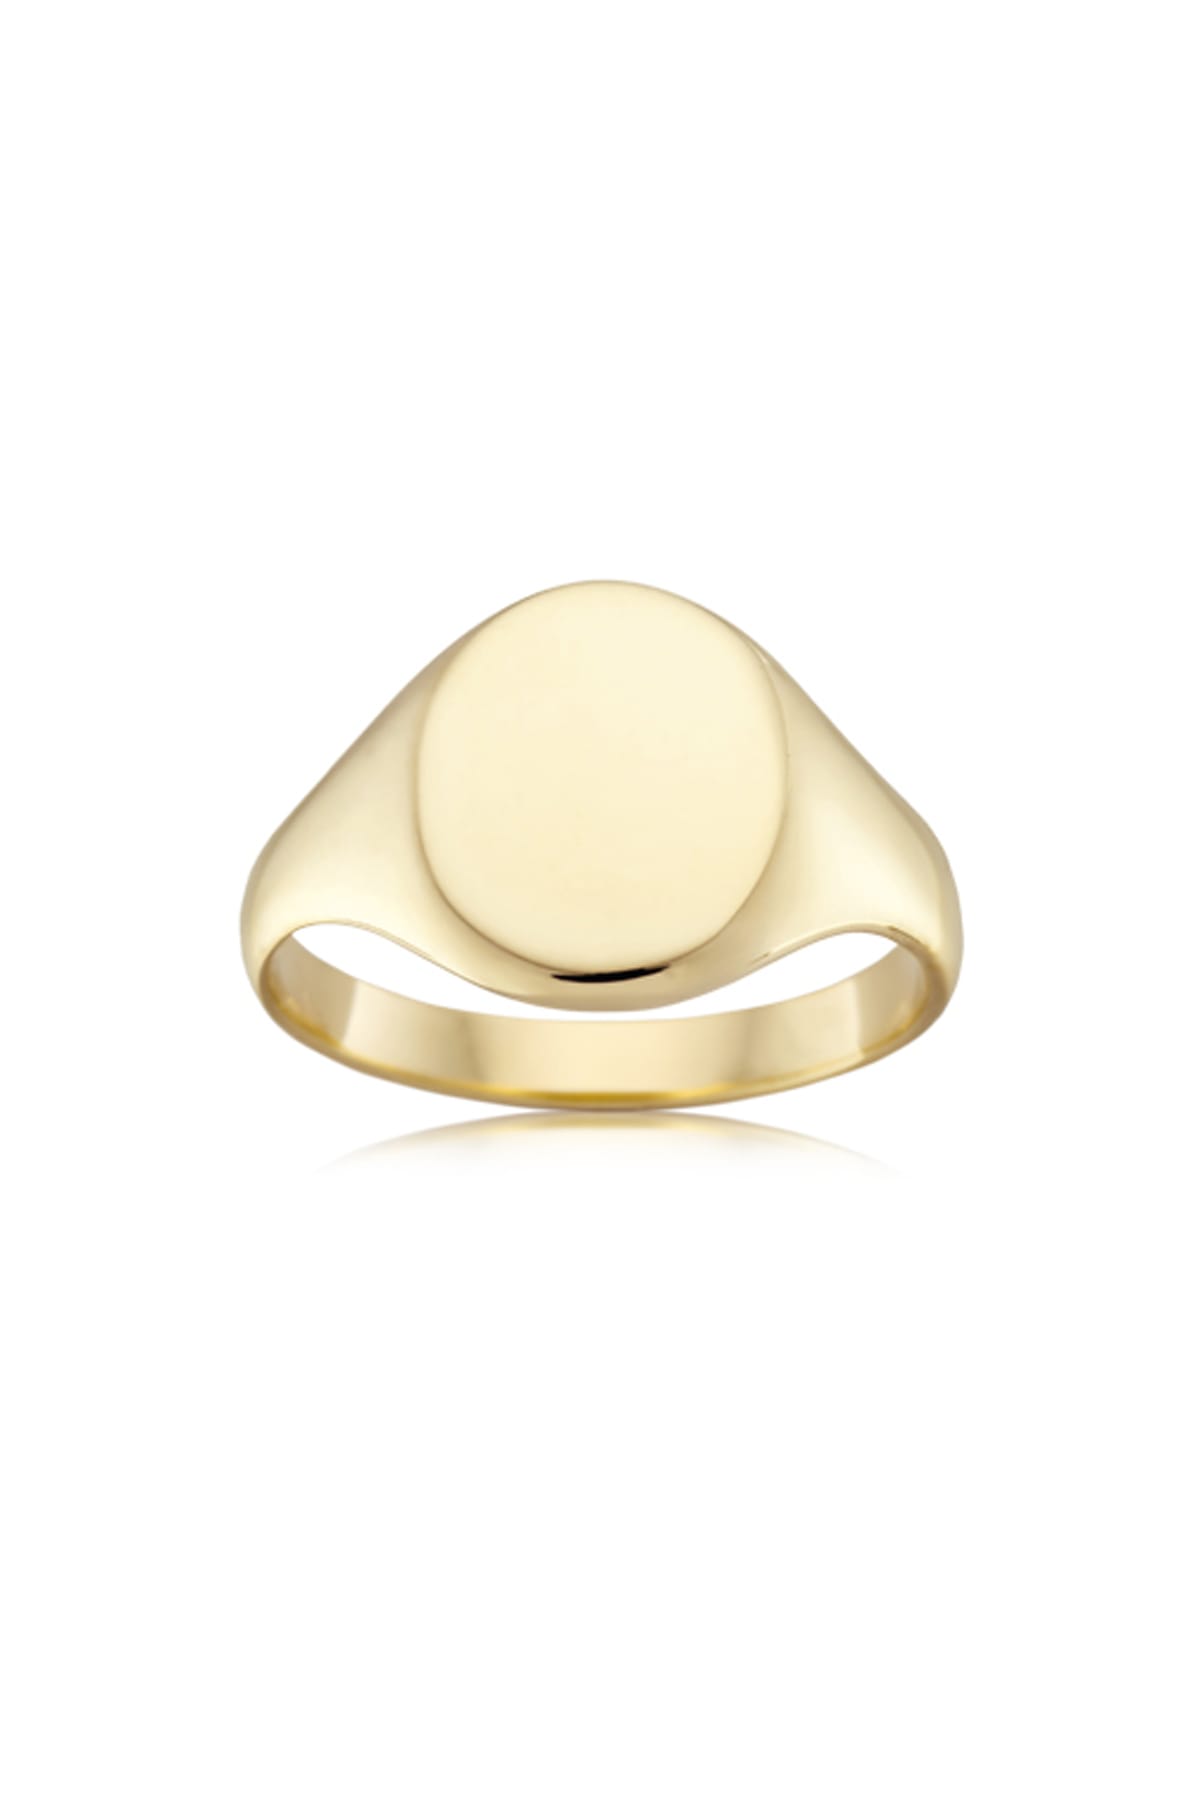 Solid Oval Plain Flat Top Signet Ring available at LeGassick Diamonds and Jewellery Gold Coast, Australia.